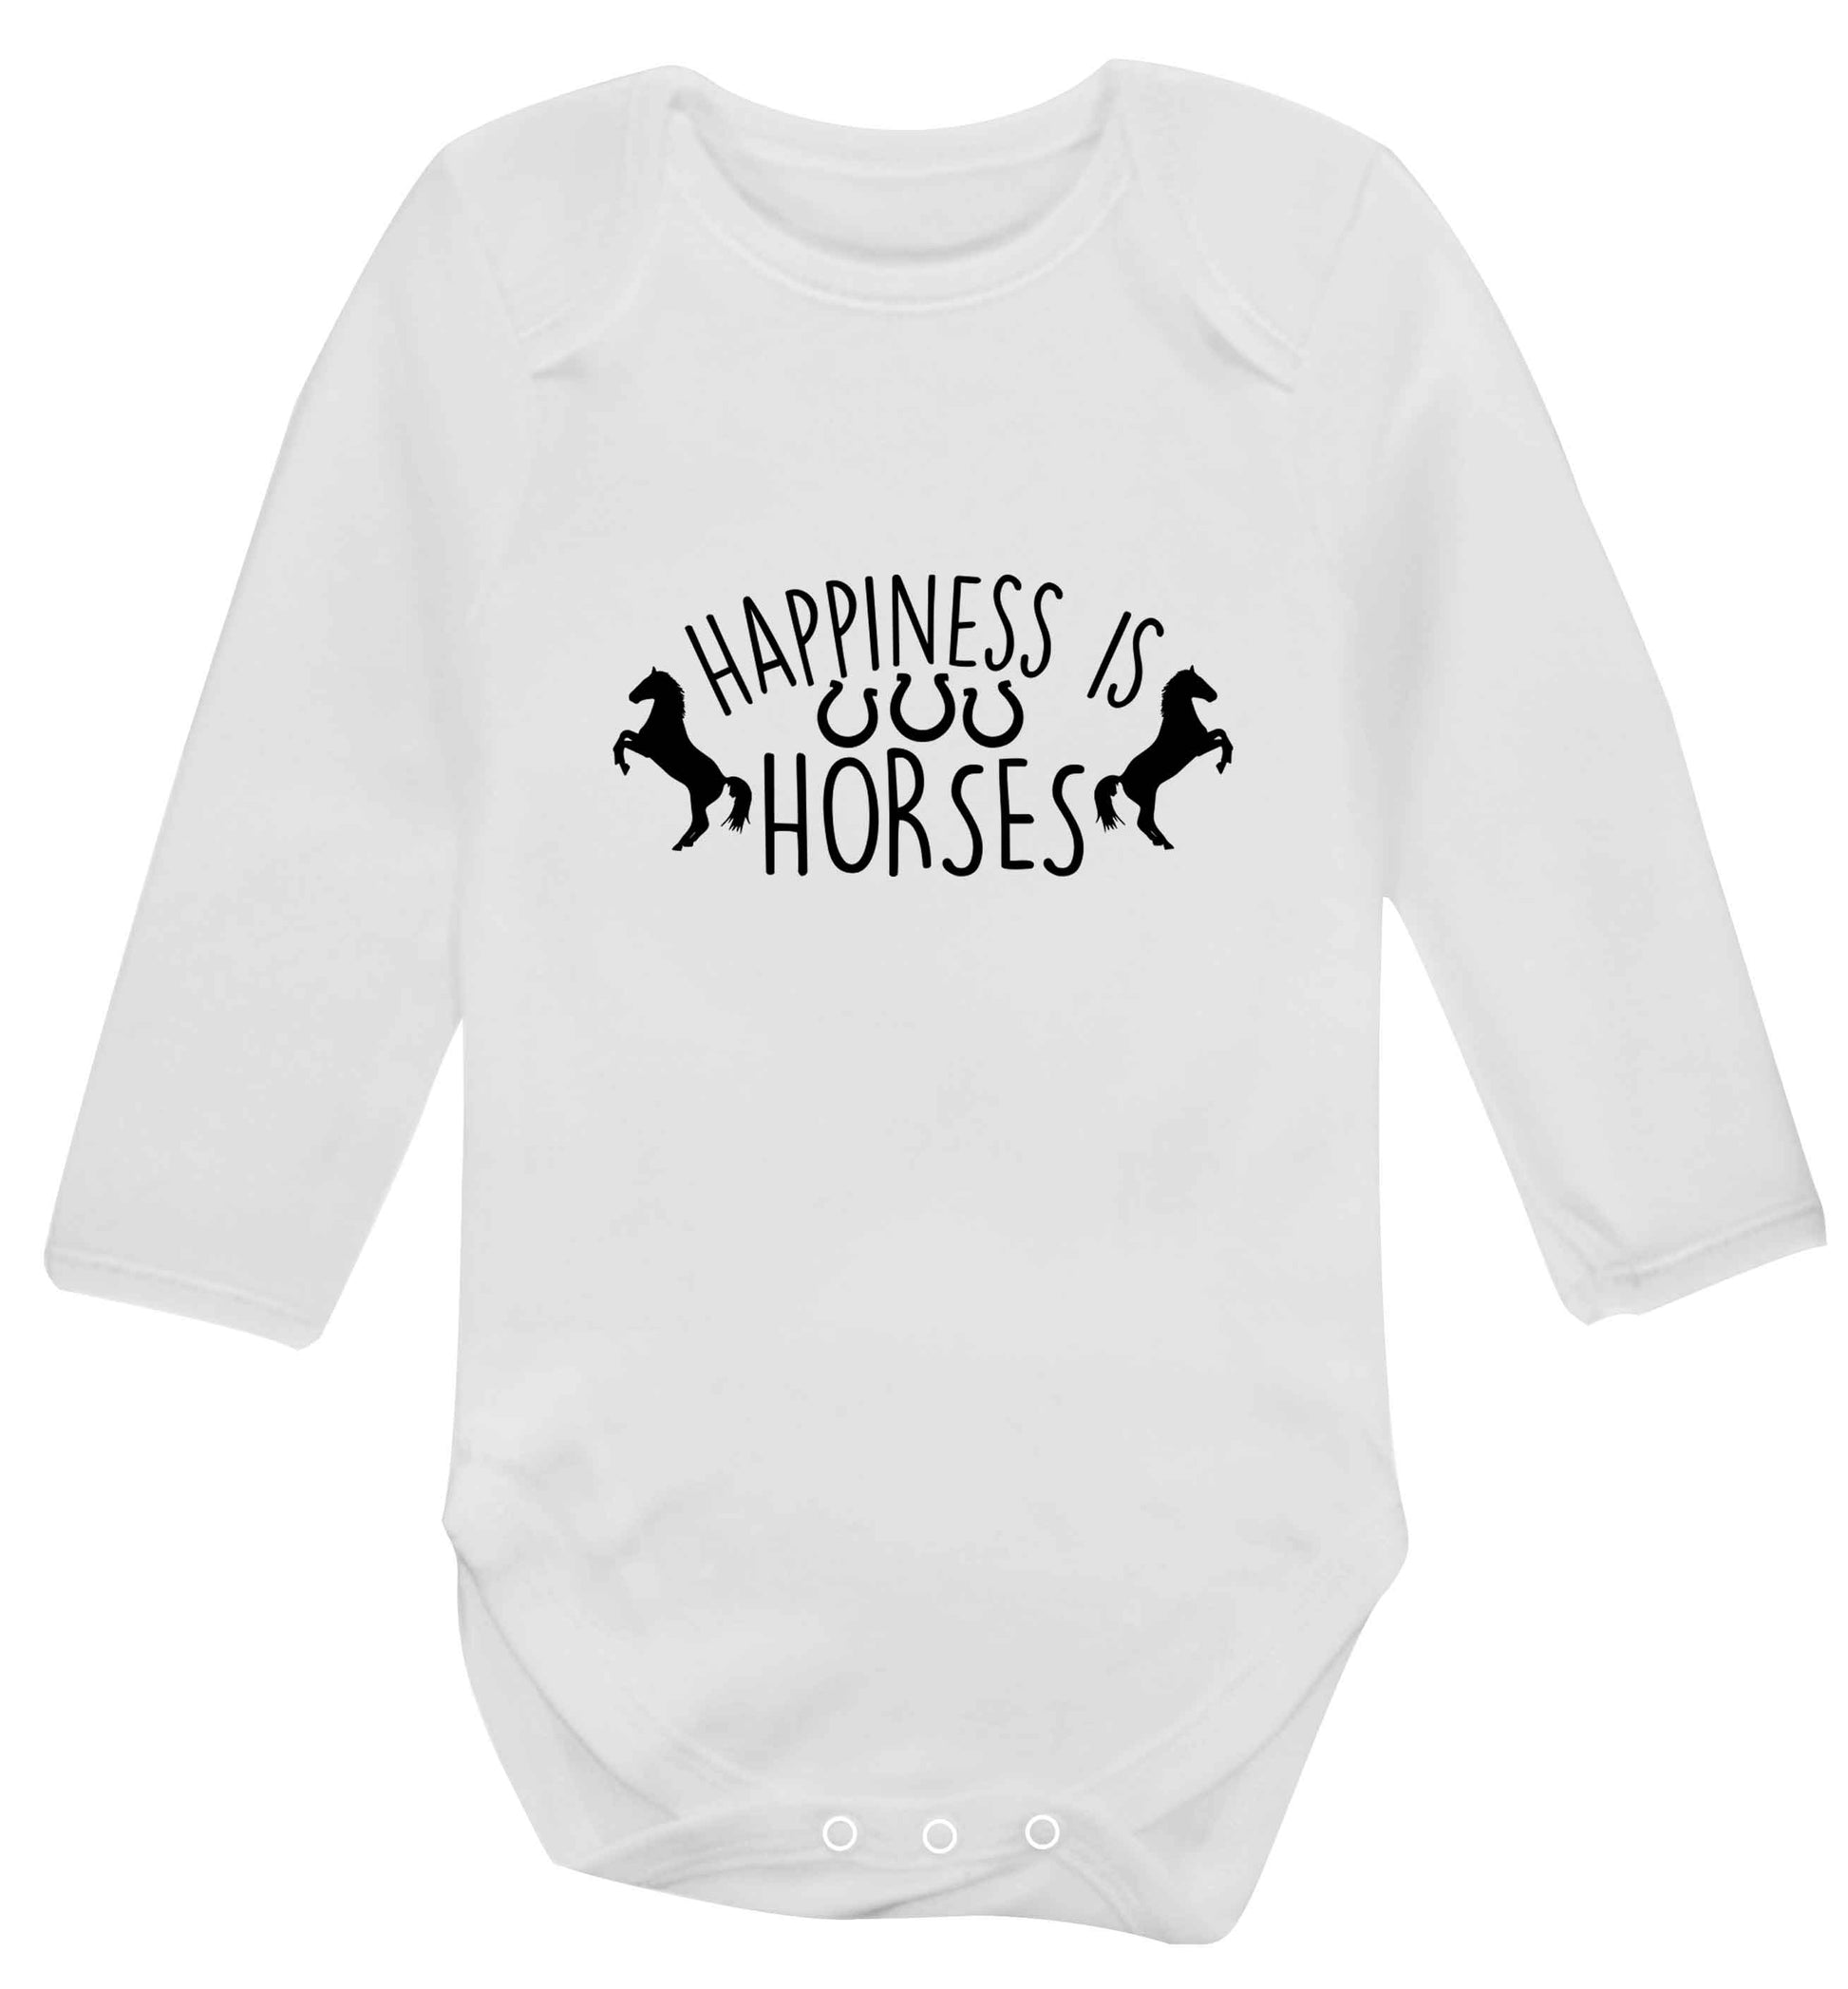 Happiness is horses baby vest long sleeved white 6-12 months